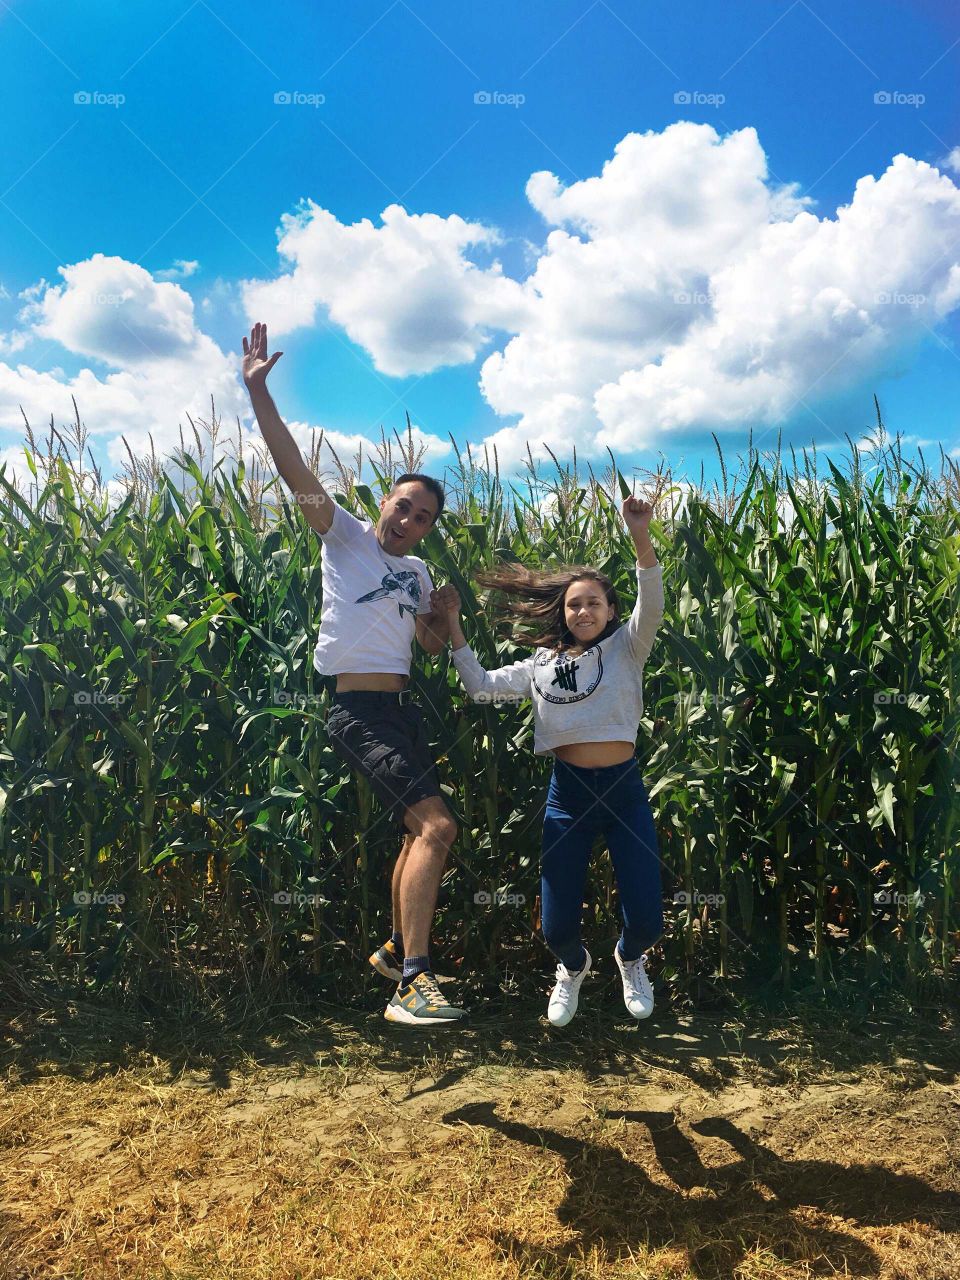 Smiling father and daughter jumping together at the corn field 